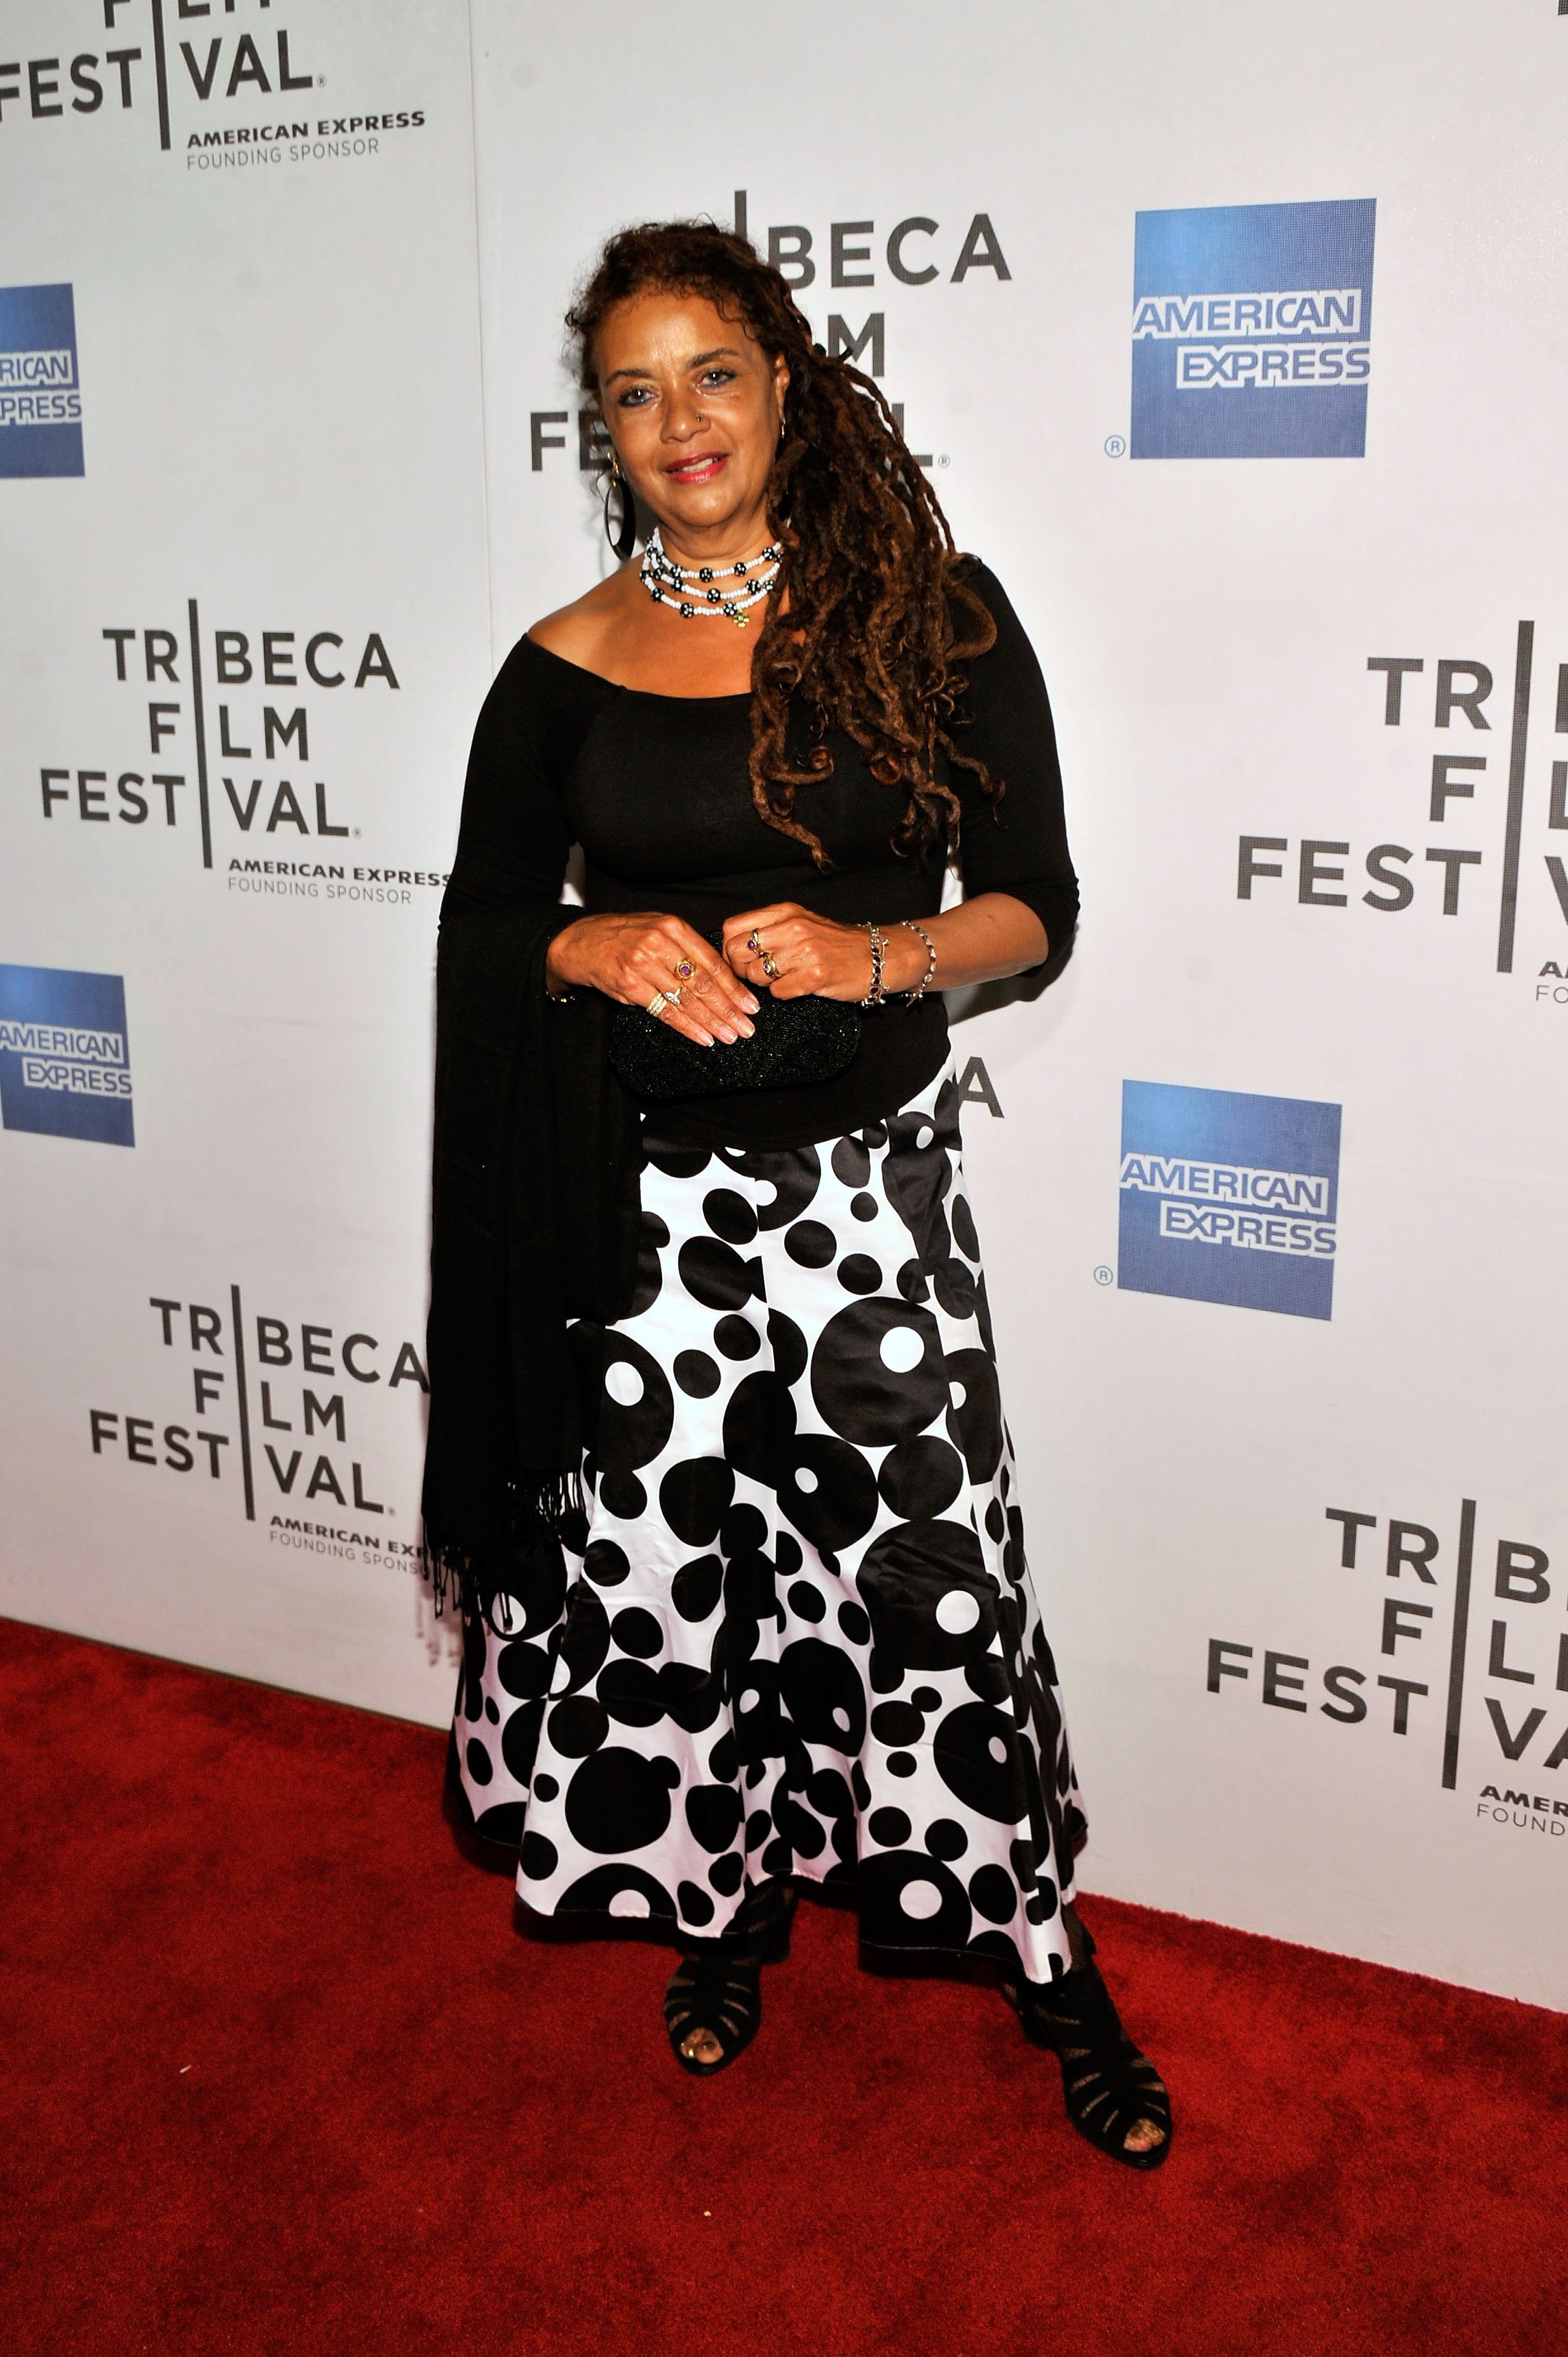 Diahnne Abbott at the 2013 Tribeca Film Festival on April 27, 2013 in New York City. | Photo: Getty Images